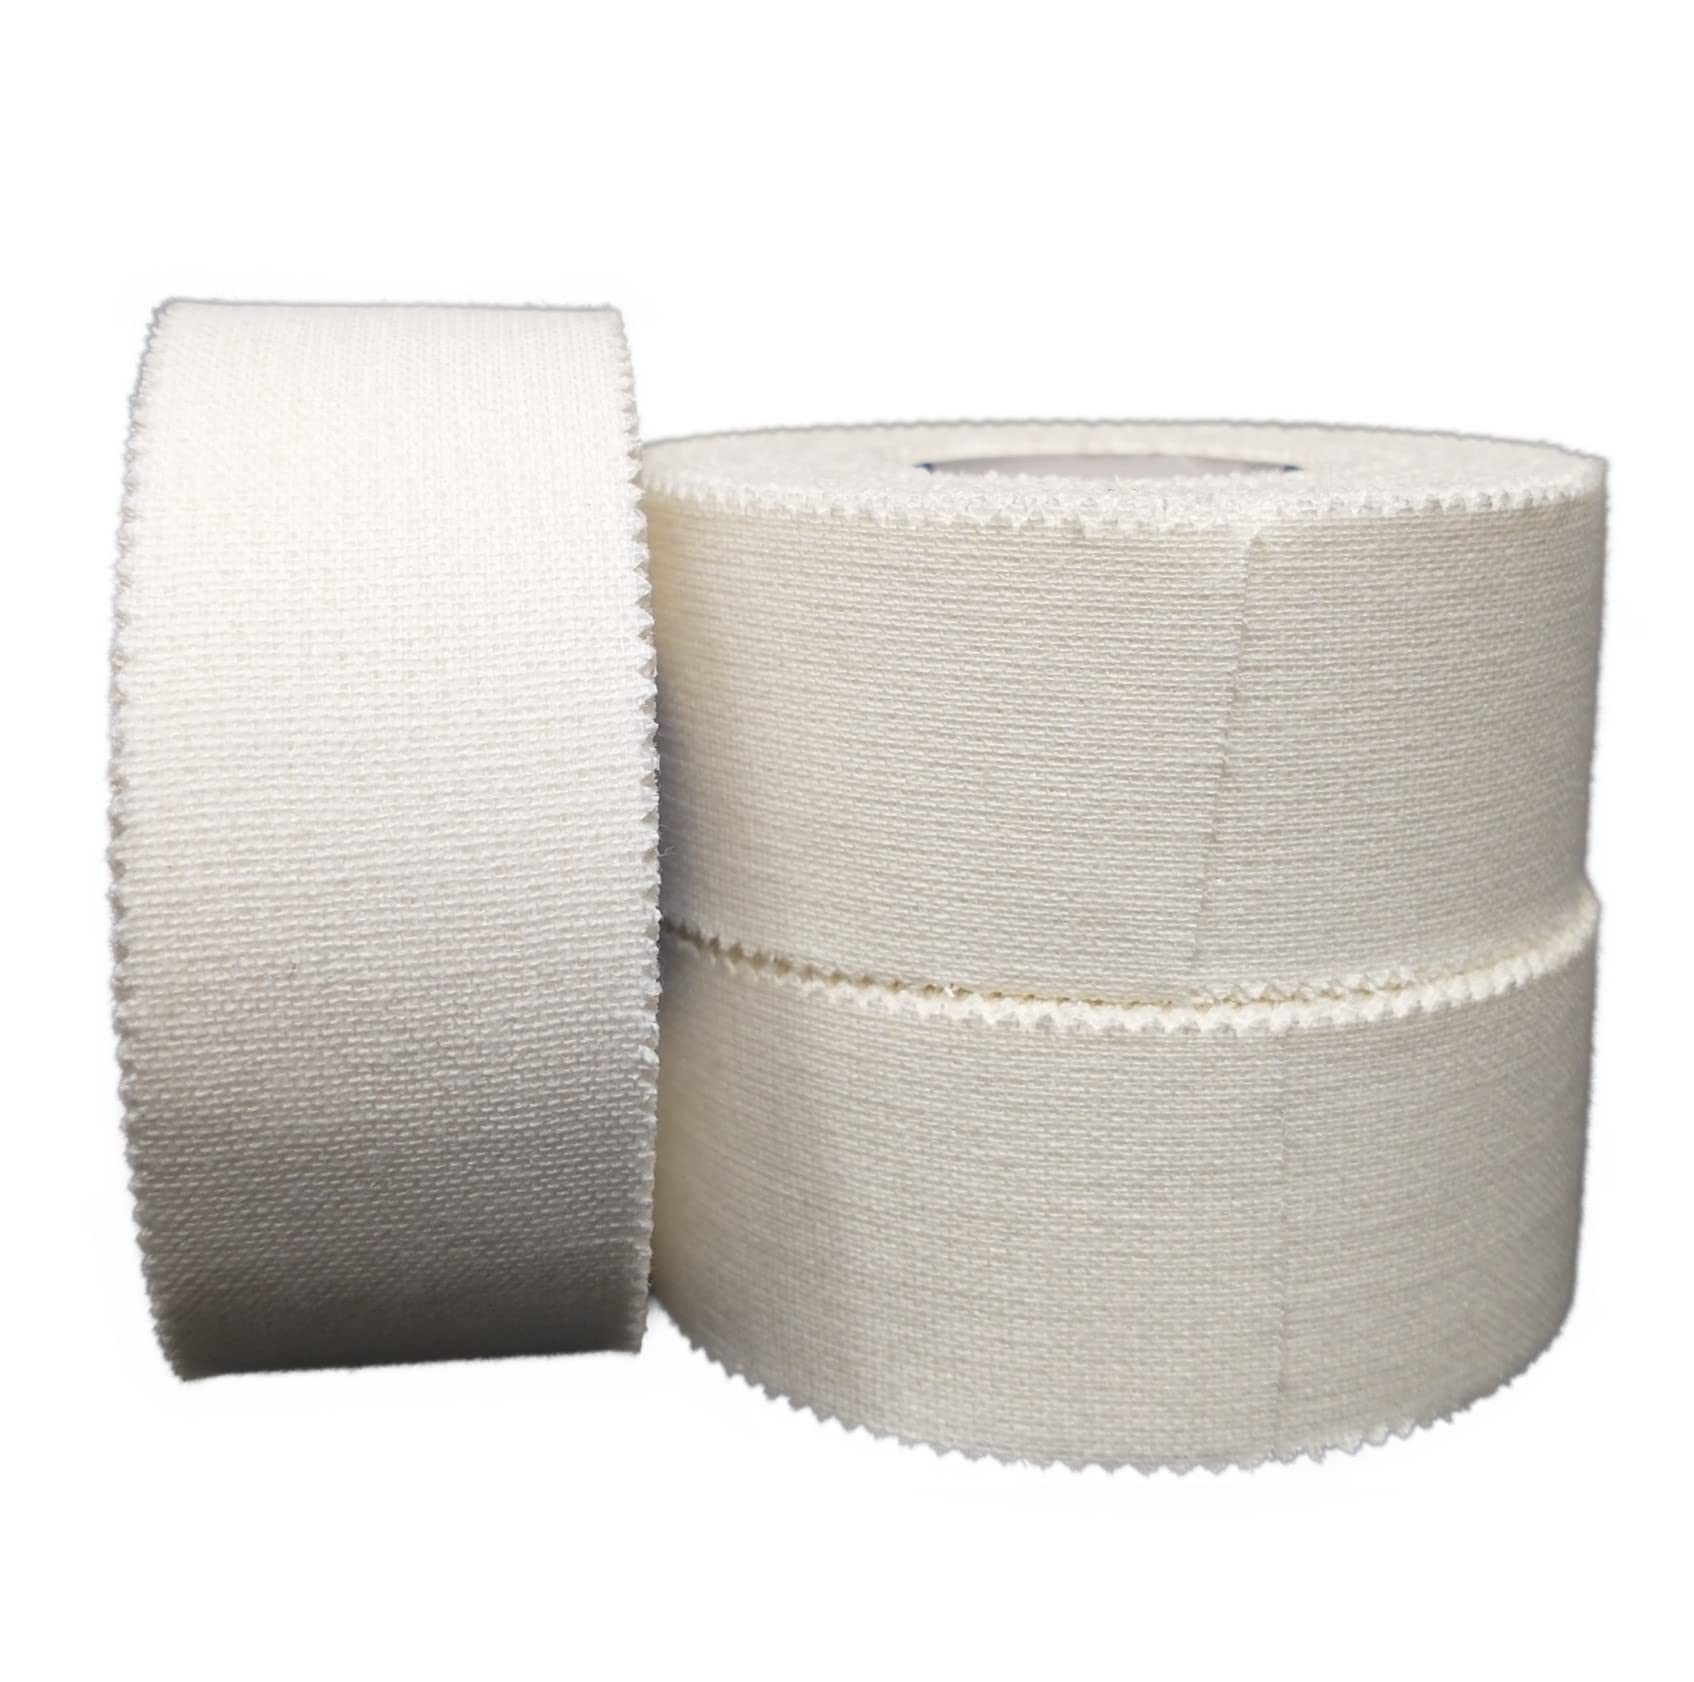 Porous Tape 3 Pack Soft Fabric Cloth Breathable Surgical/Medical Adhesive  Tape 1 Wide x 10 Yards roll + Vakly 1st Aid Kit Guide (3)